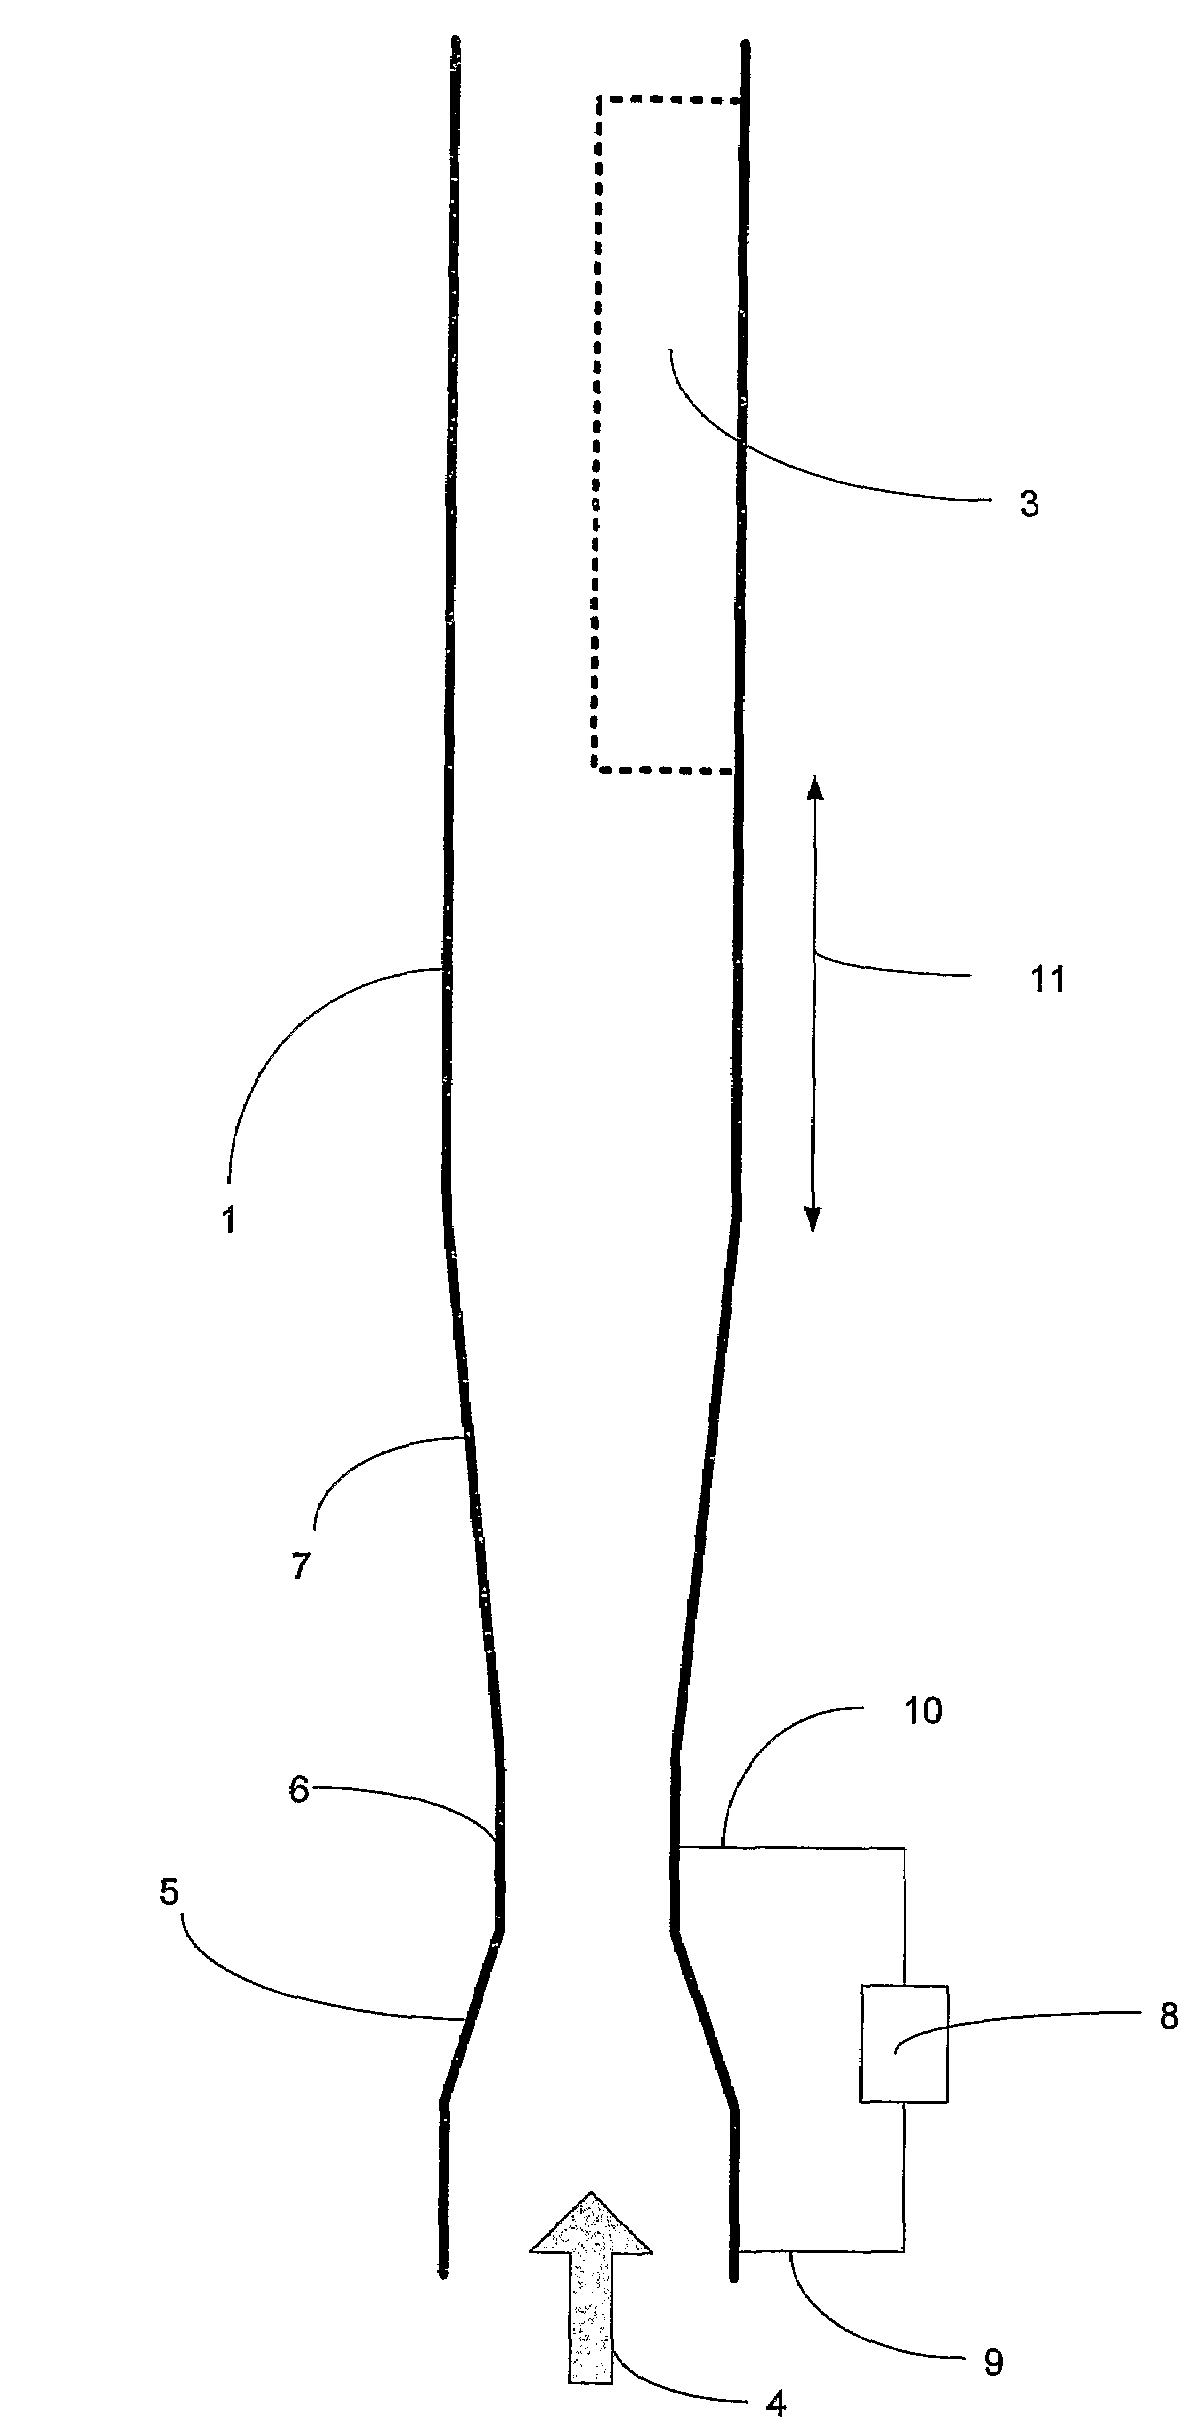 Method and apparatus for tomographic multiphase flow measurements